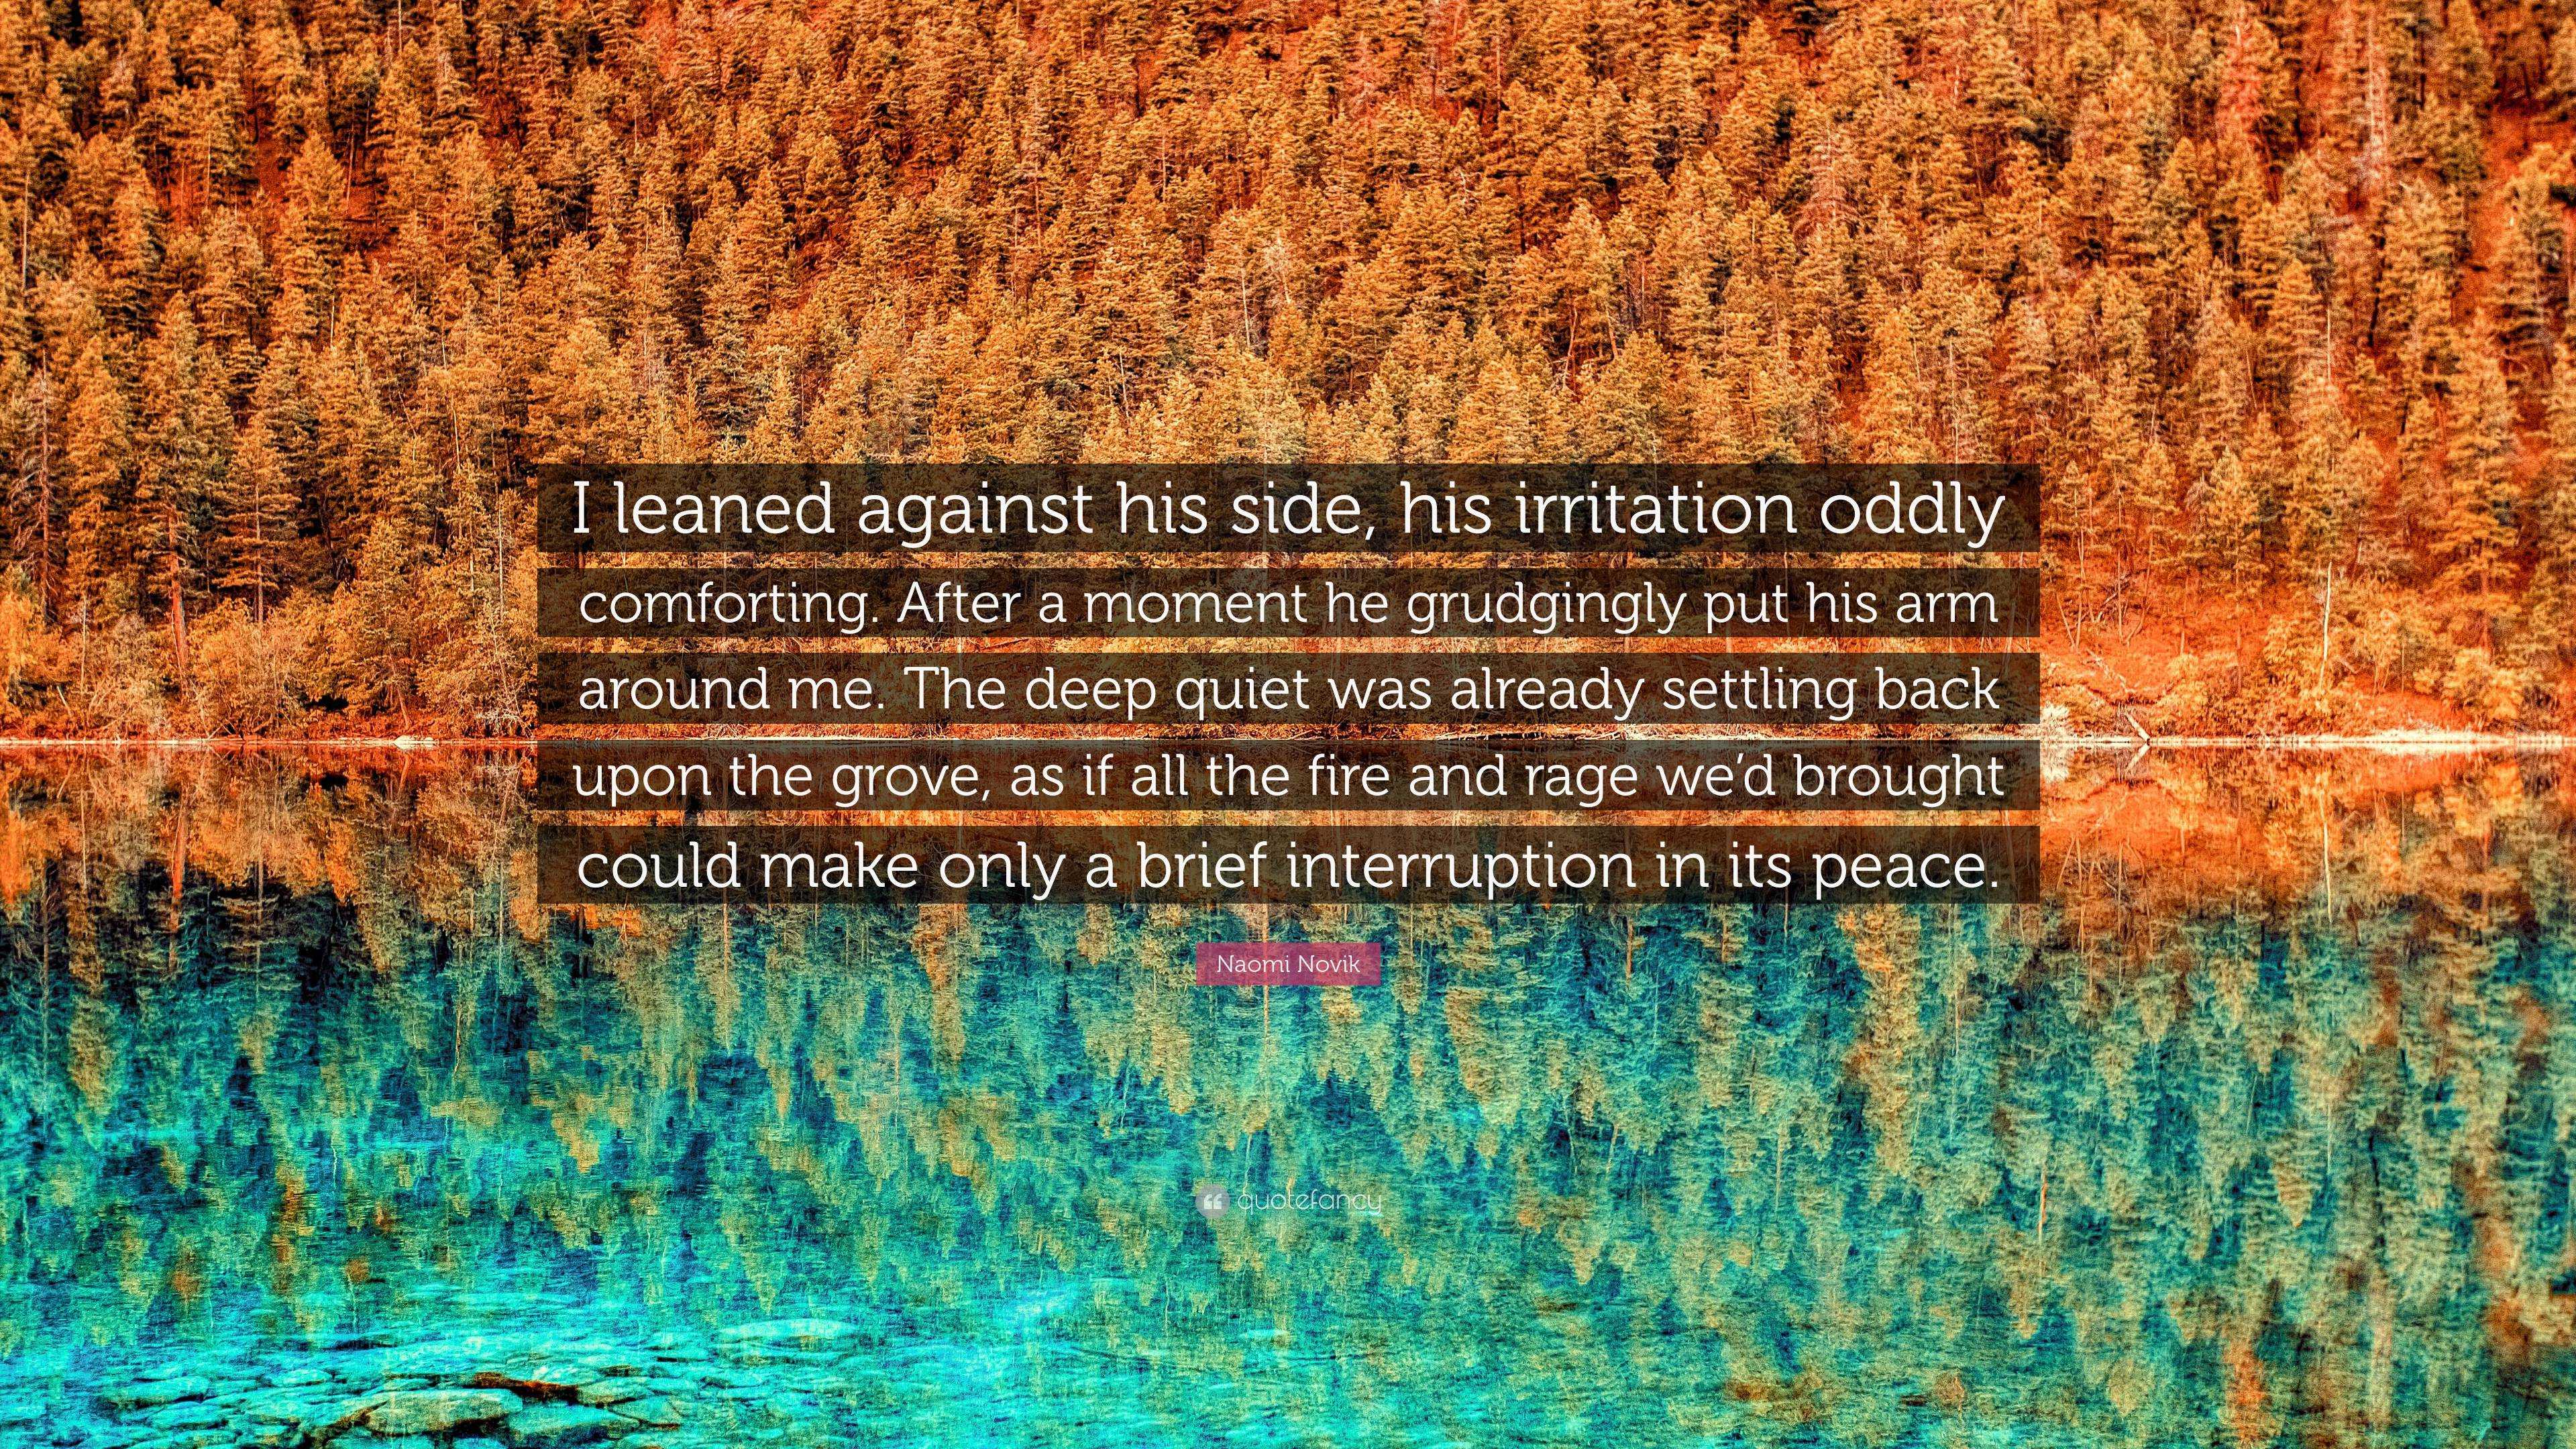 Naomi Novik Quote: "I leaned against his side, his irritation oddly comforting. After a moment ...